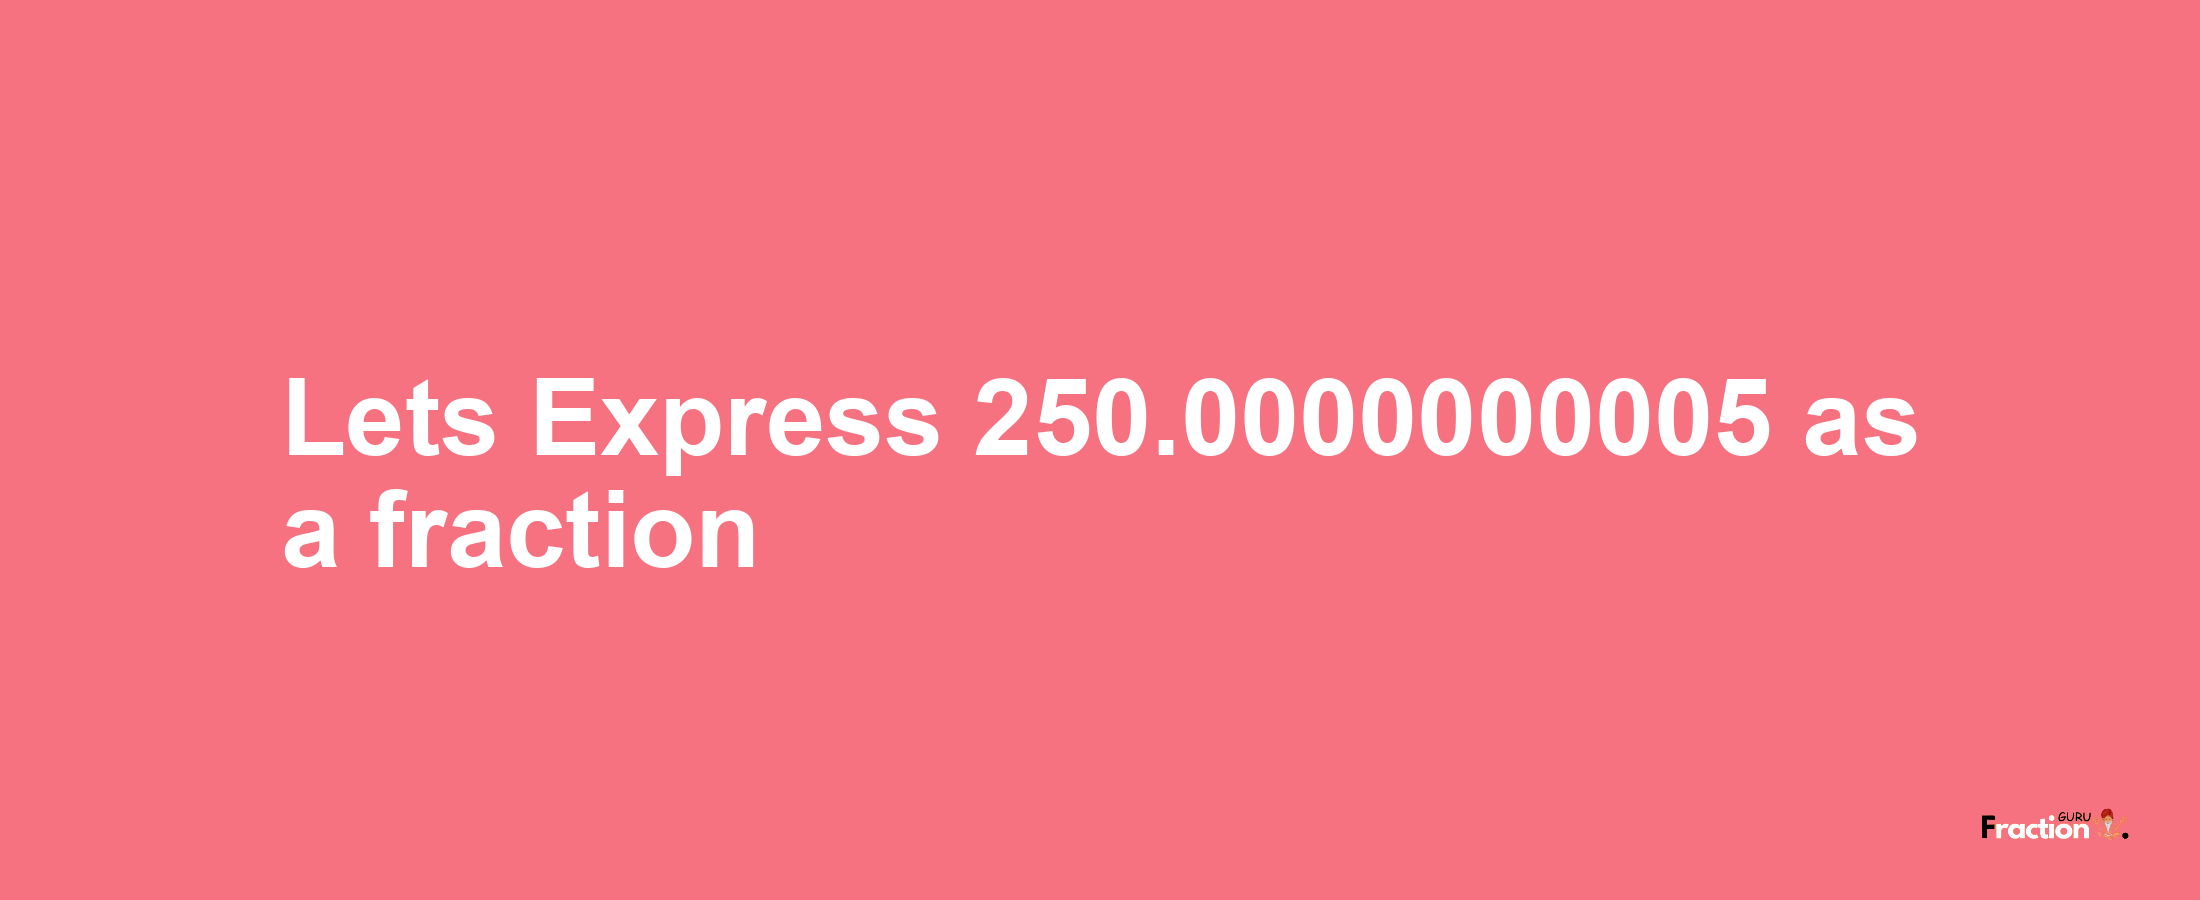 Lets Express 250.0000000005 as afraction